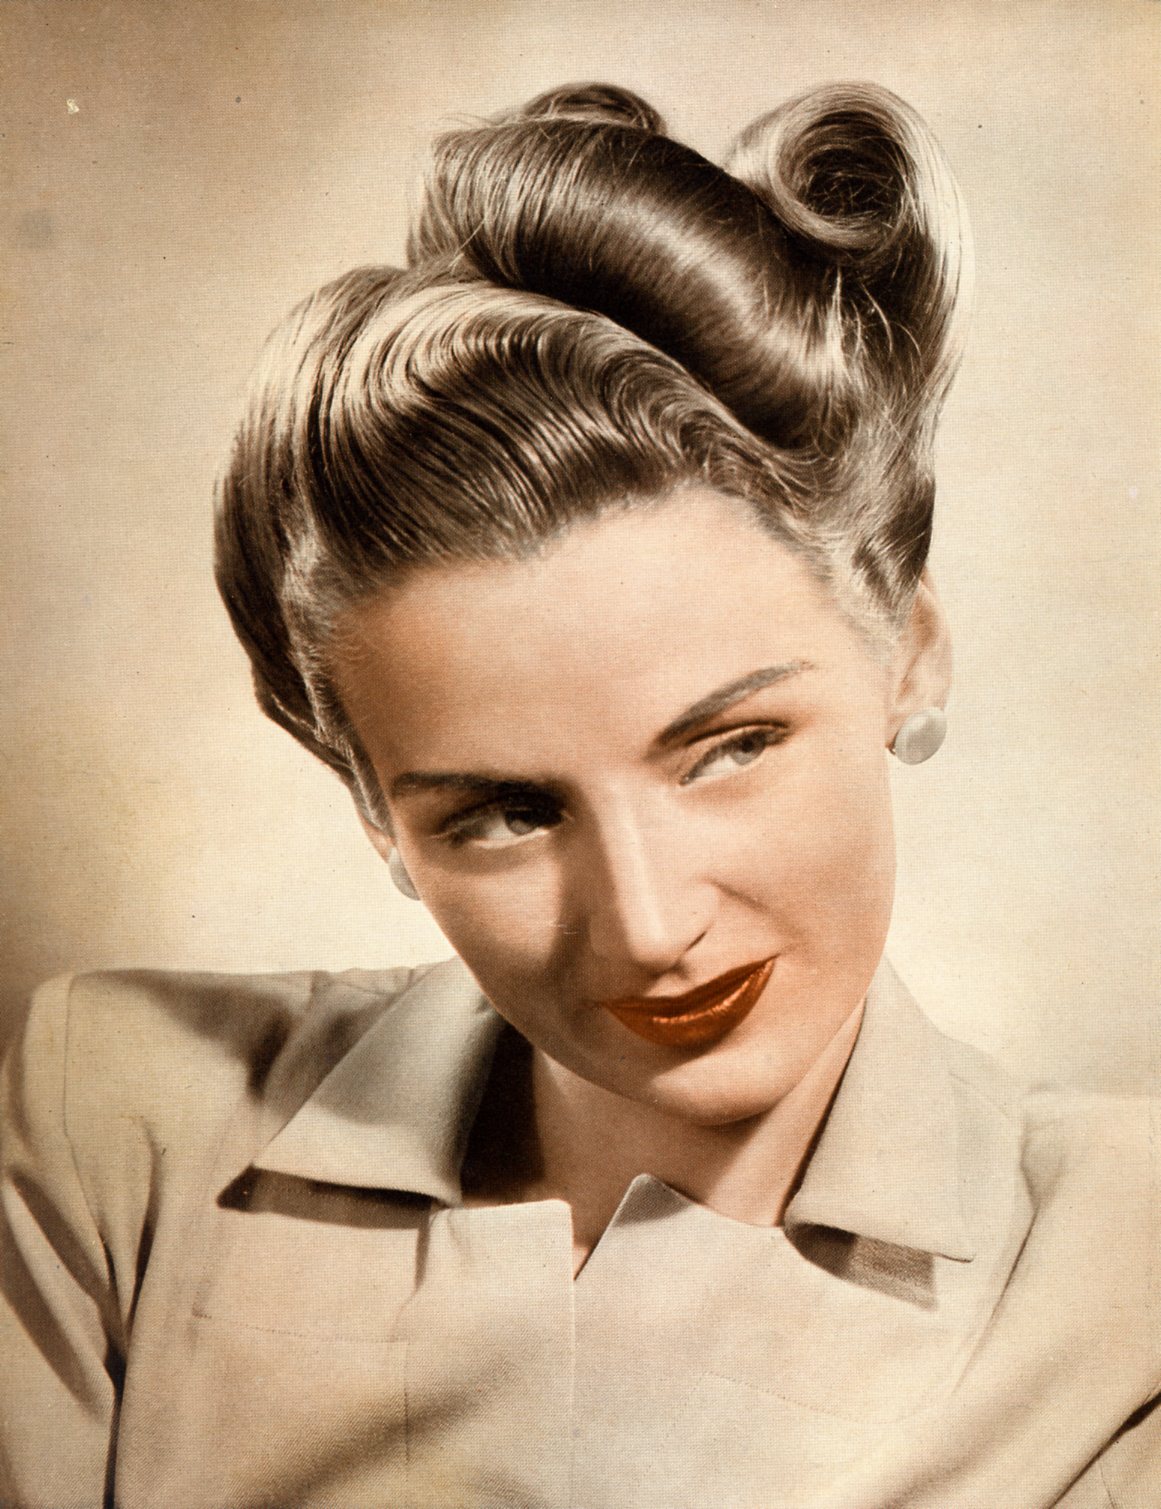 20 Vintage Hairstyles for Long Hair in 2016 - MagMent